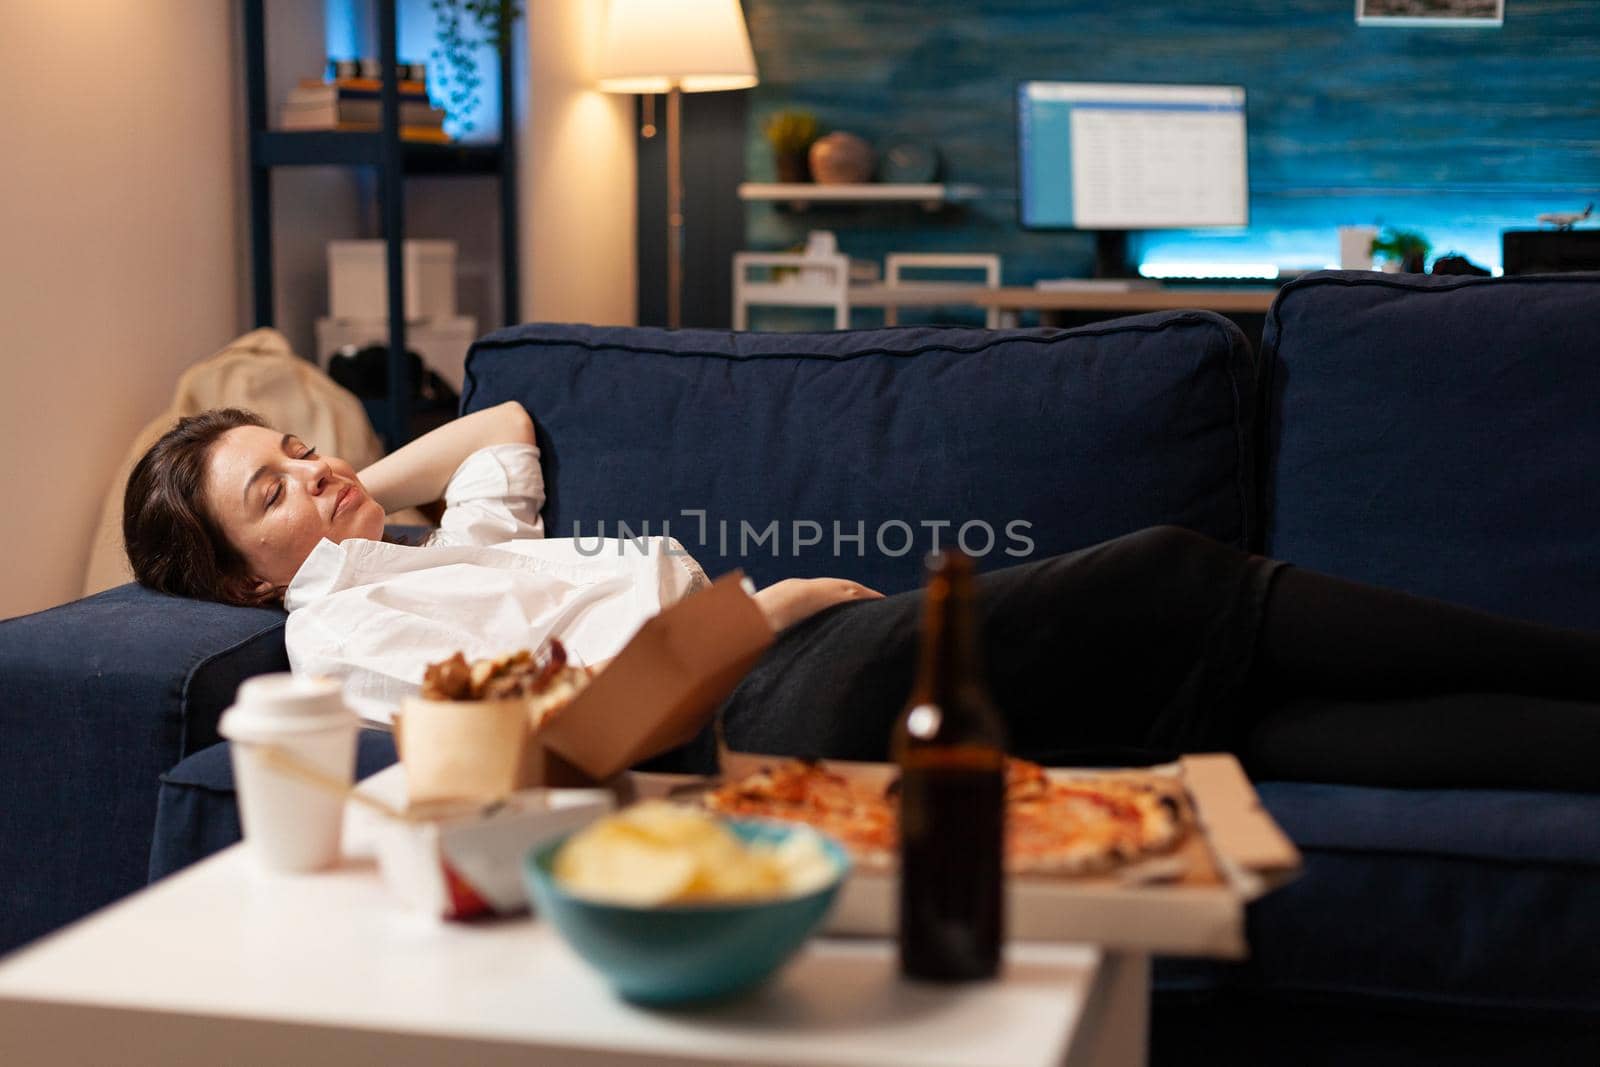 Caucasian female falling asleep after eating junk-food in living room late at night by DCStudio